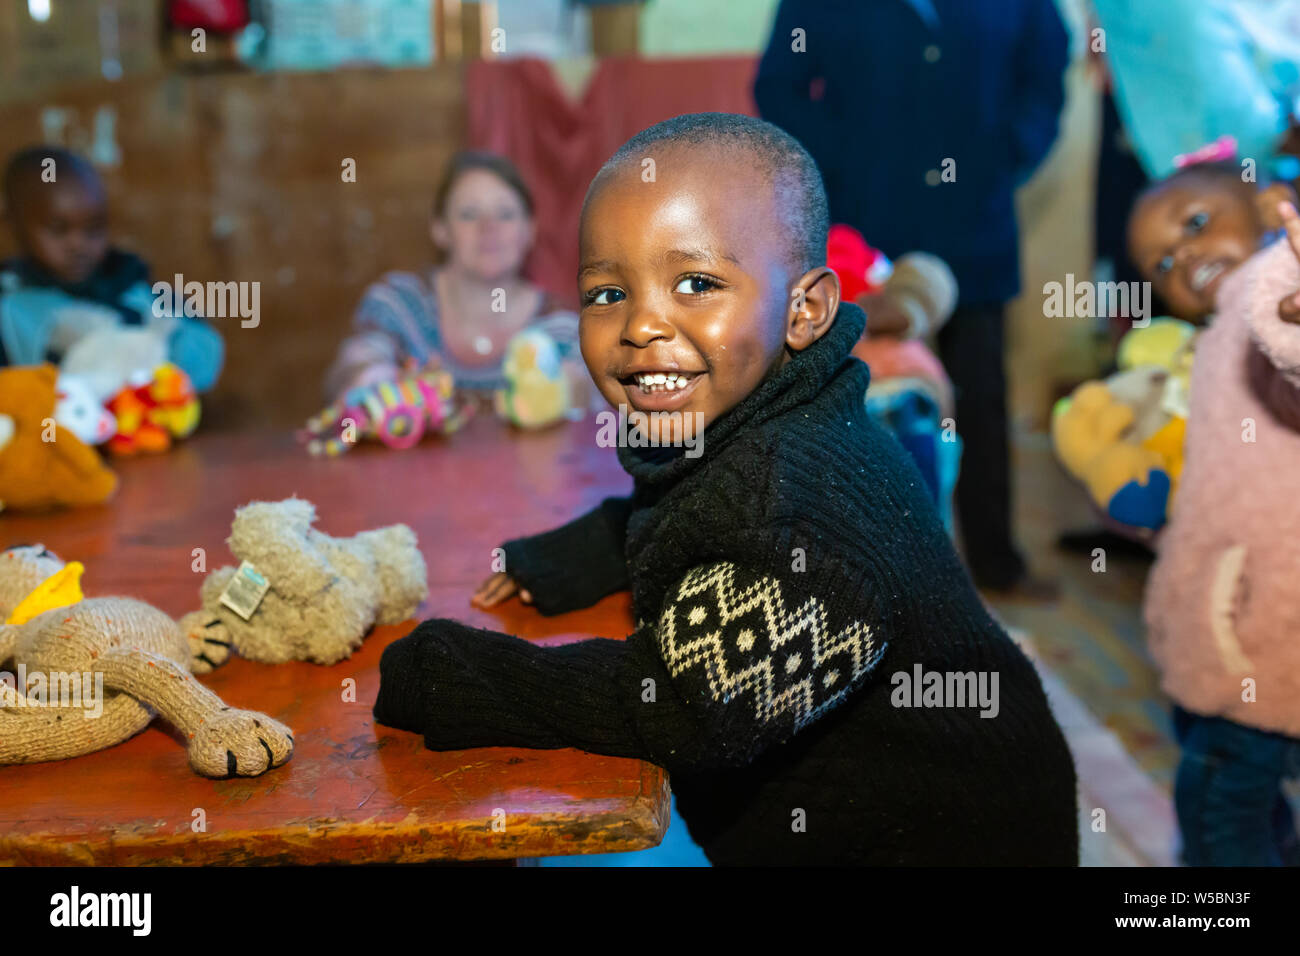 Nanyuki, Laikipia county, Kenya – June 10th, 2019: Young smiling Kenyan child sitting at table while at nursery playing with stuffed toys that had bee Stock Photo